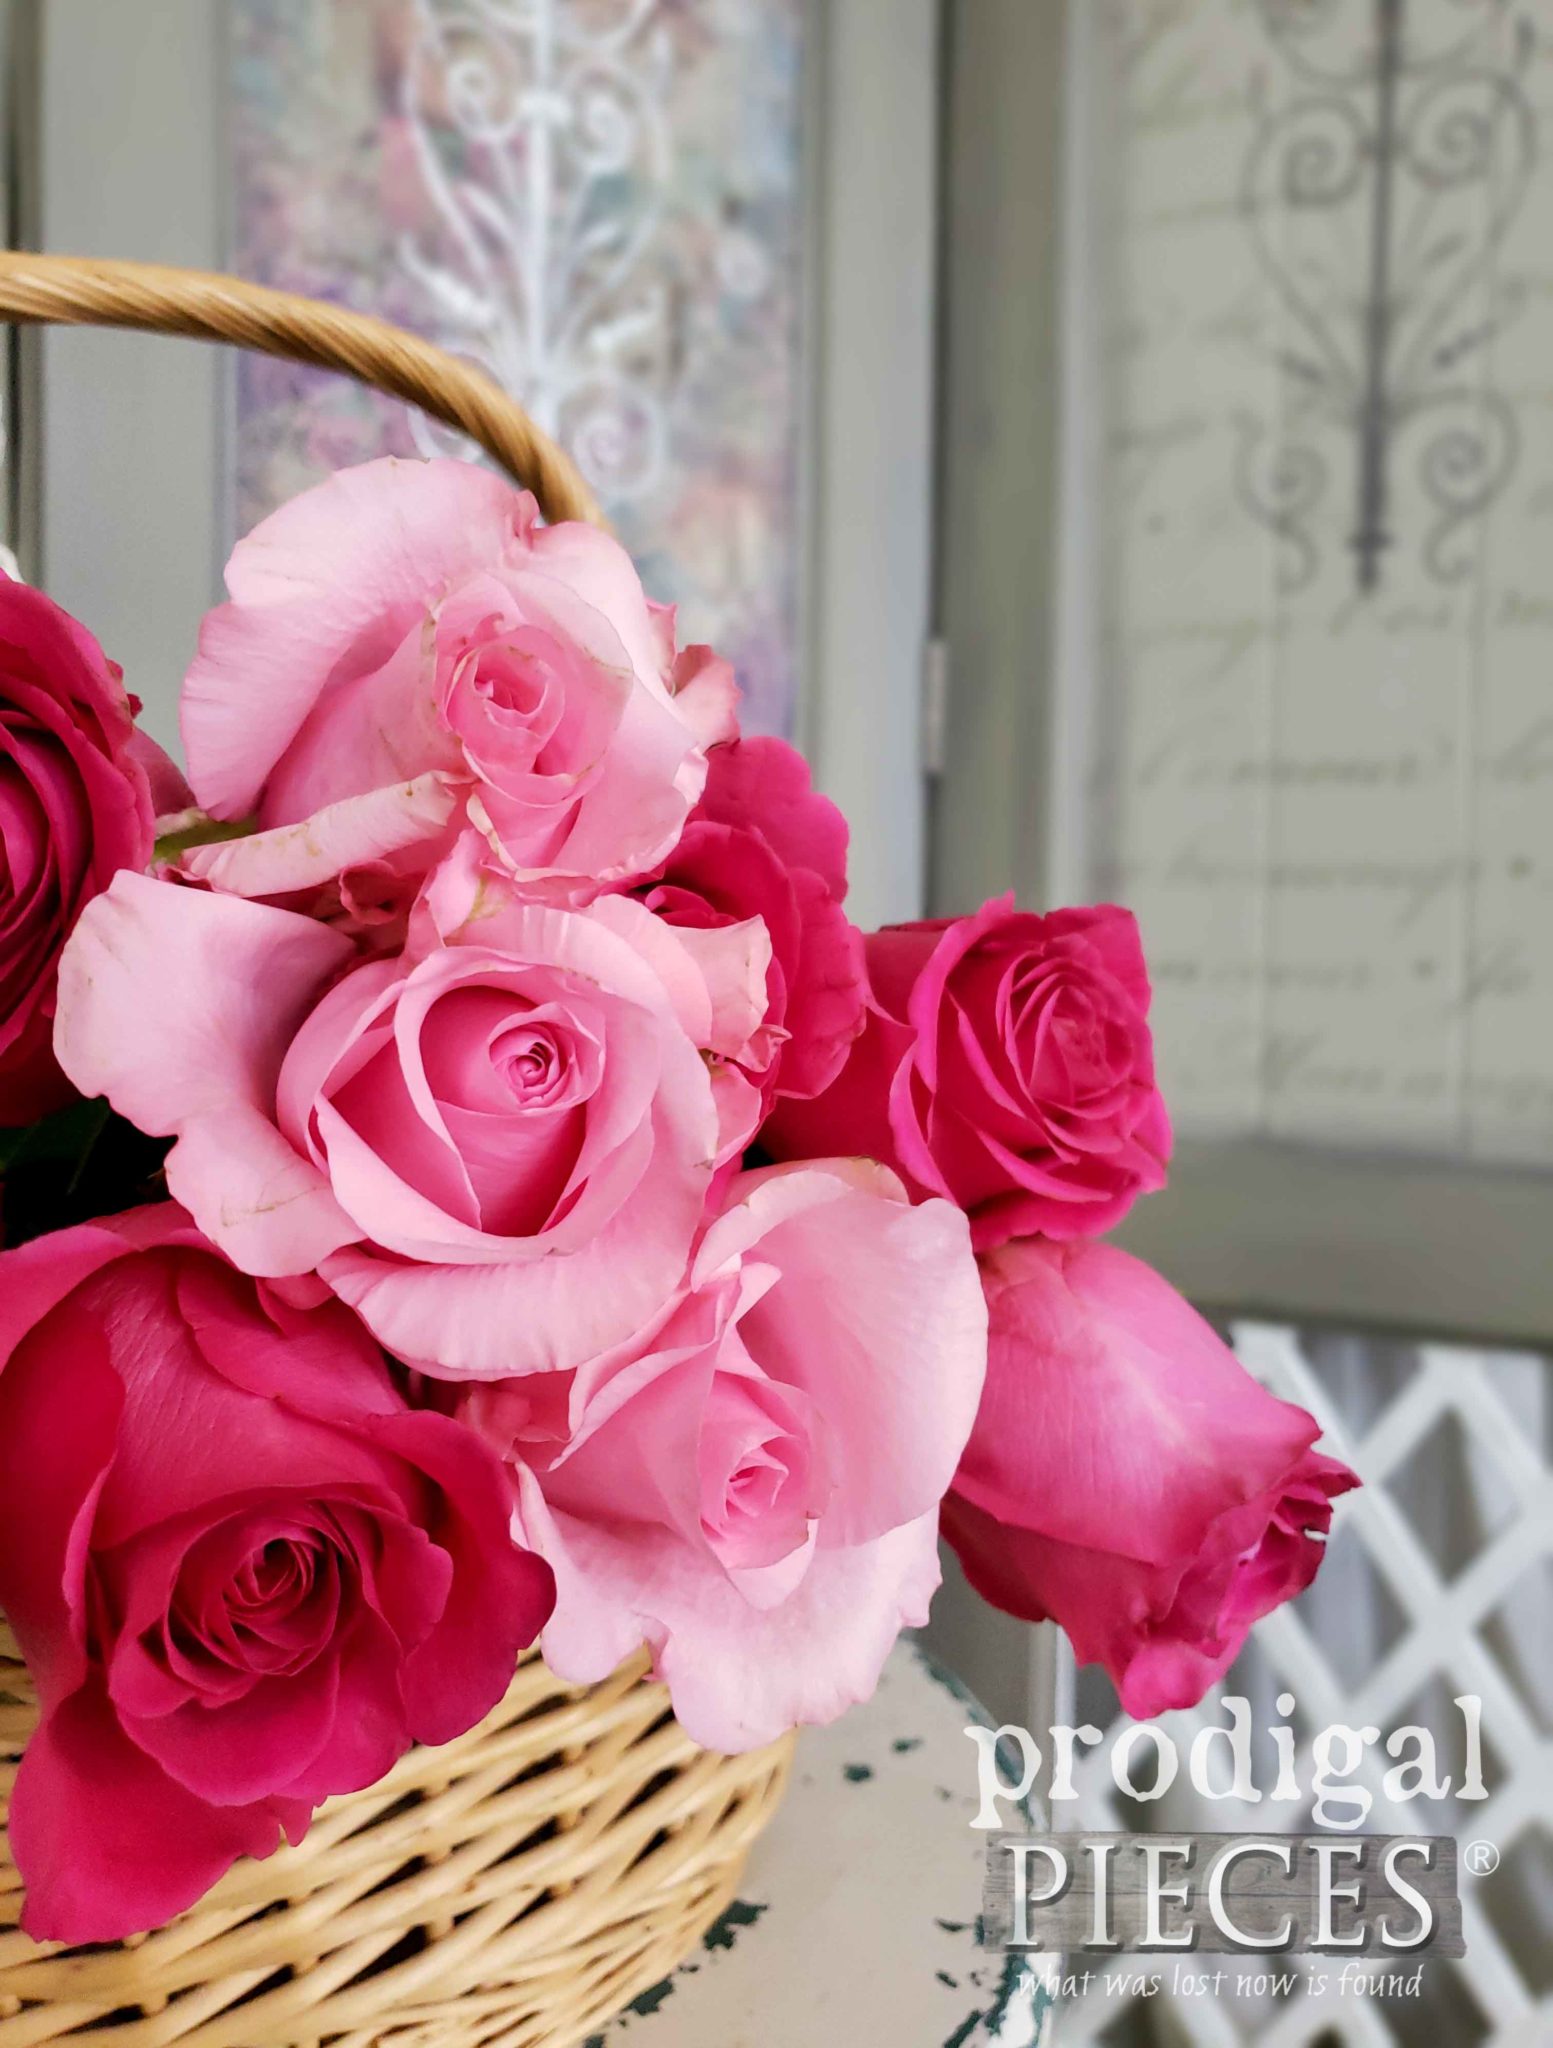 Basket of Roses in Farmhouse Shabby Chic Bedroom by Larissa of Prodigal Pieces | prodigalpieces.com